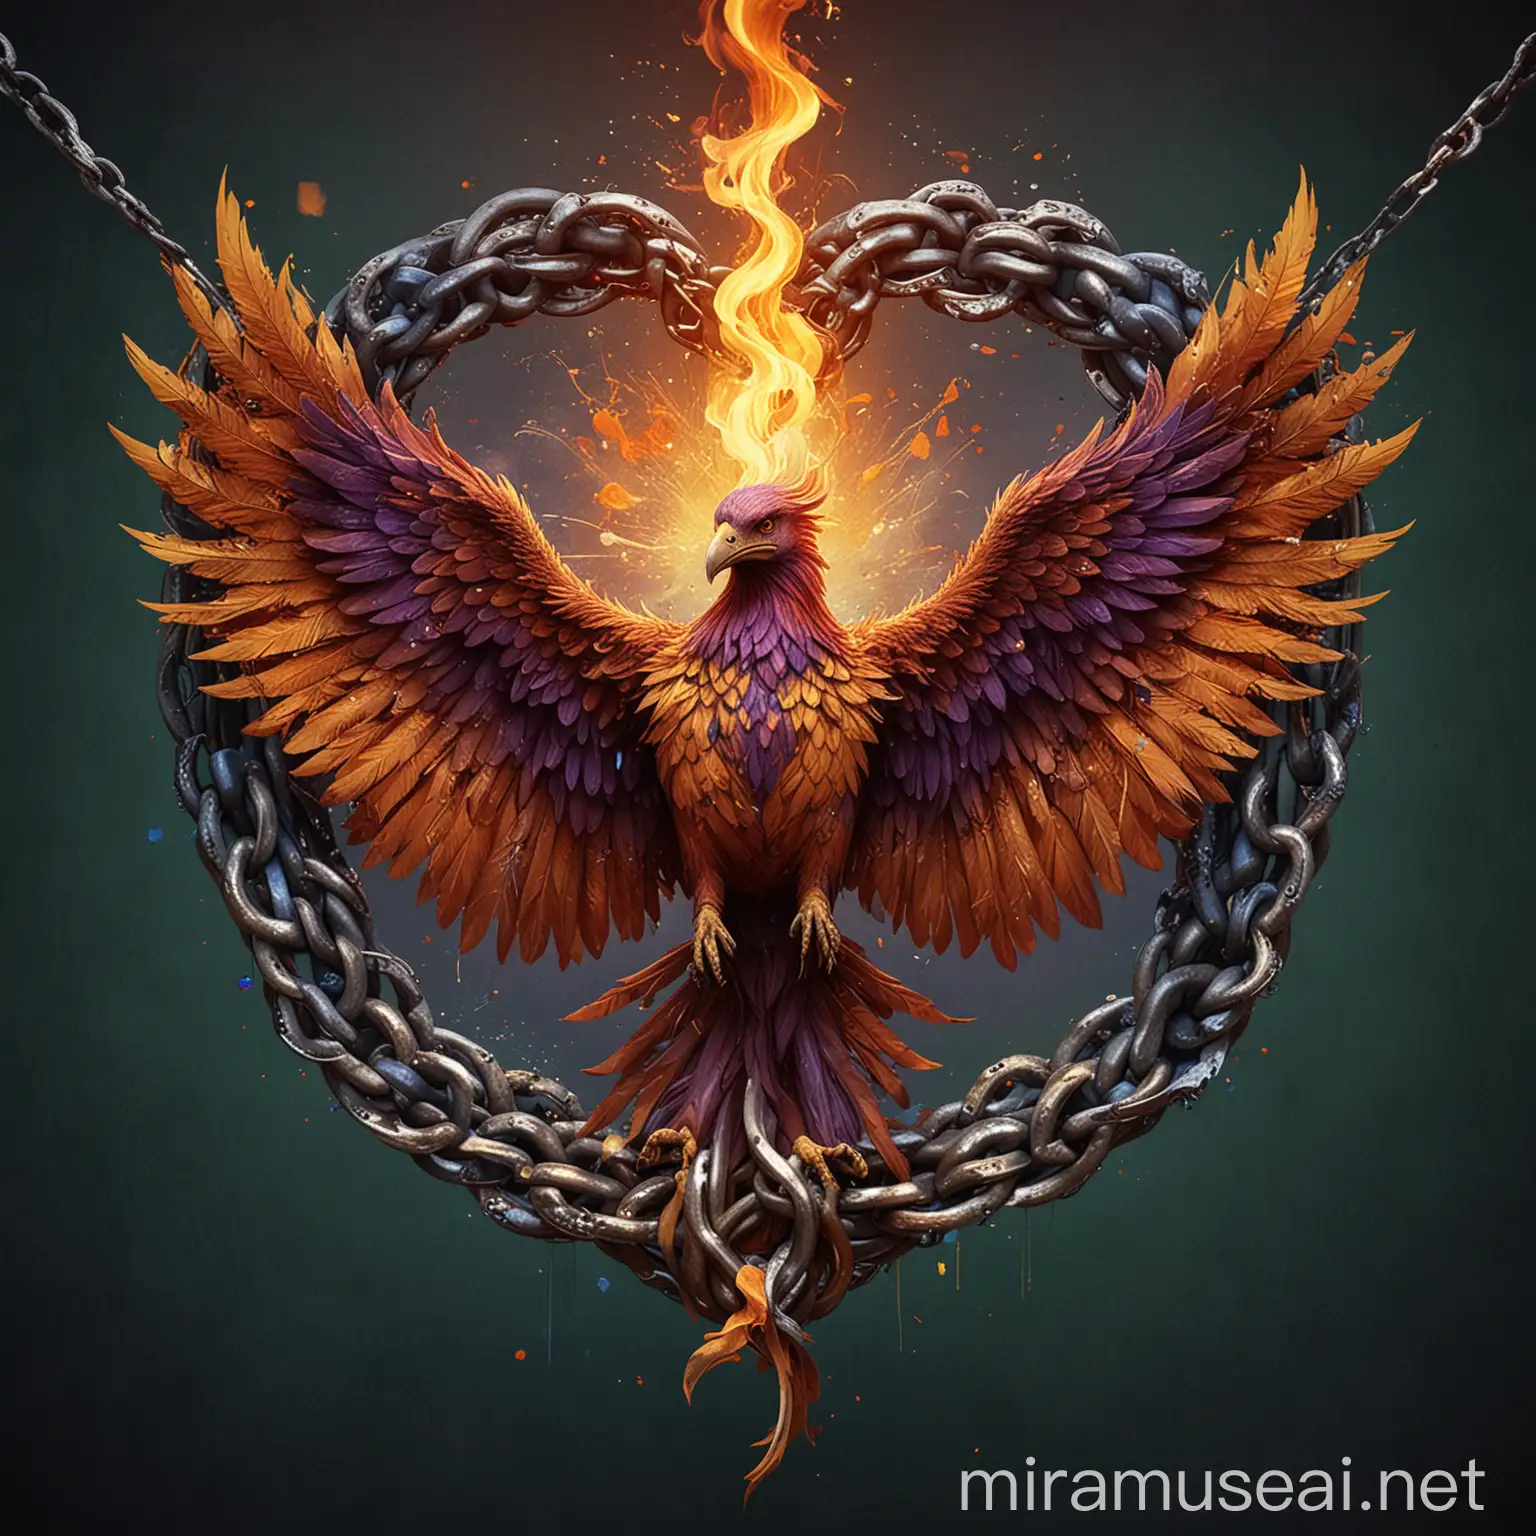 1. Start by selecting an image of a phoenix trapped in the chains of addiction.
2. Using colors and patterns that evoke feelings of hope and freedom, reconstruct a part of the image to depict the phoenix soaring towards liberation.
   - Blue Color: #3498DB
   - Green Color: #2ECC71
   - Orange Color: #F39C12
   - Yellow Color: #F4D03F
   - Red Color: #E74C3C
   - Purple Color: #9B59B6
3. Draw flames of hope and aspiration emanating from the heart of the phoenix, using bright and captivating colors.
   - Yellow Color: #F4D03F
   - Orange Color: #F39C12
   - Red Color: #E74C3C
   - Purple Color: #9B59B6
   - Dark Blue Color: #34495E
   - Dark Green Color: #229954
4. Alongside the image, write short and inspirational sentences conveying a message of freedom and transformation to the viewers.
   - Broken Chain Pattern: #000000 (Black)
   - Silver Chain Pattern: #BDC3C7
   - Dark Blue Pattern: #34495E
   - Brown Pattern: #8B4513
   - Copper Pattern: #B87333
   - Gold Pattern: #DC7633
5. Finally, combine the image and text, creating a beautiful and inspiring media journal entry.Design Leonardo da Vinci style with digital painting art and digital art collage art